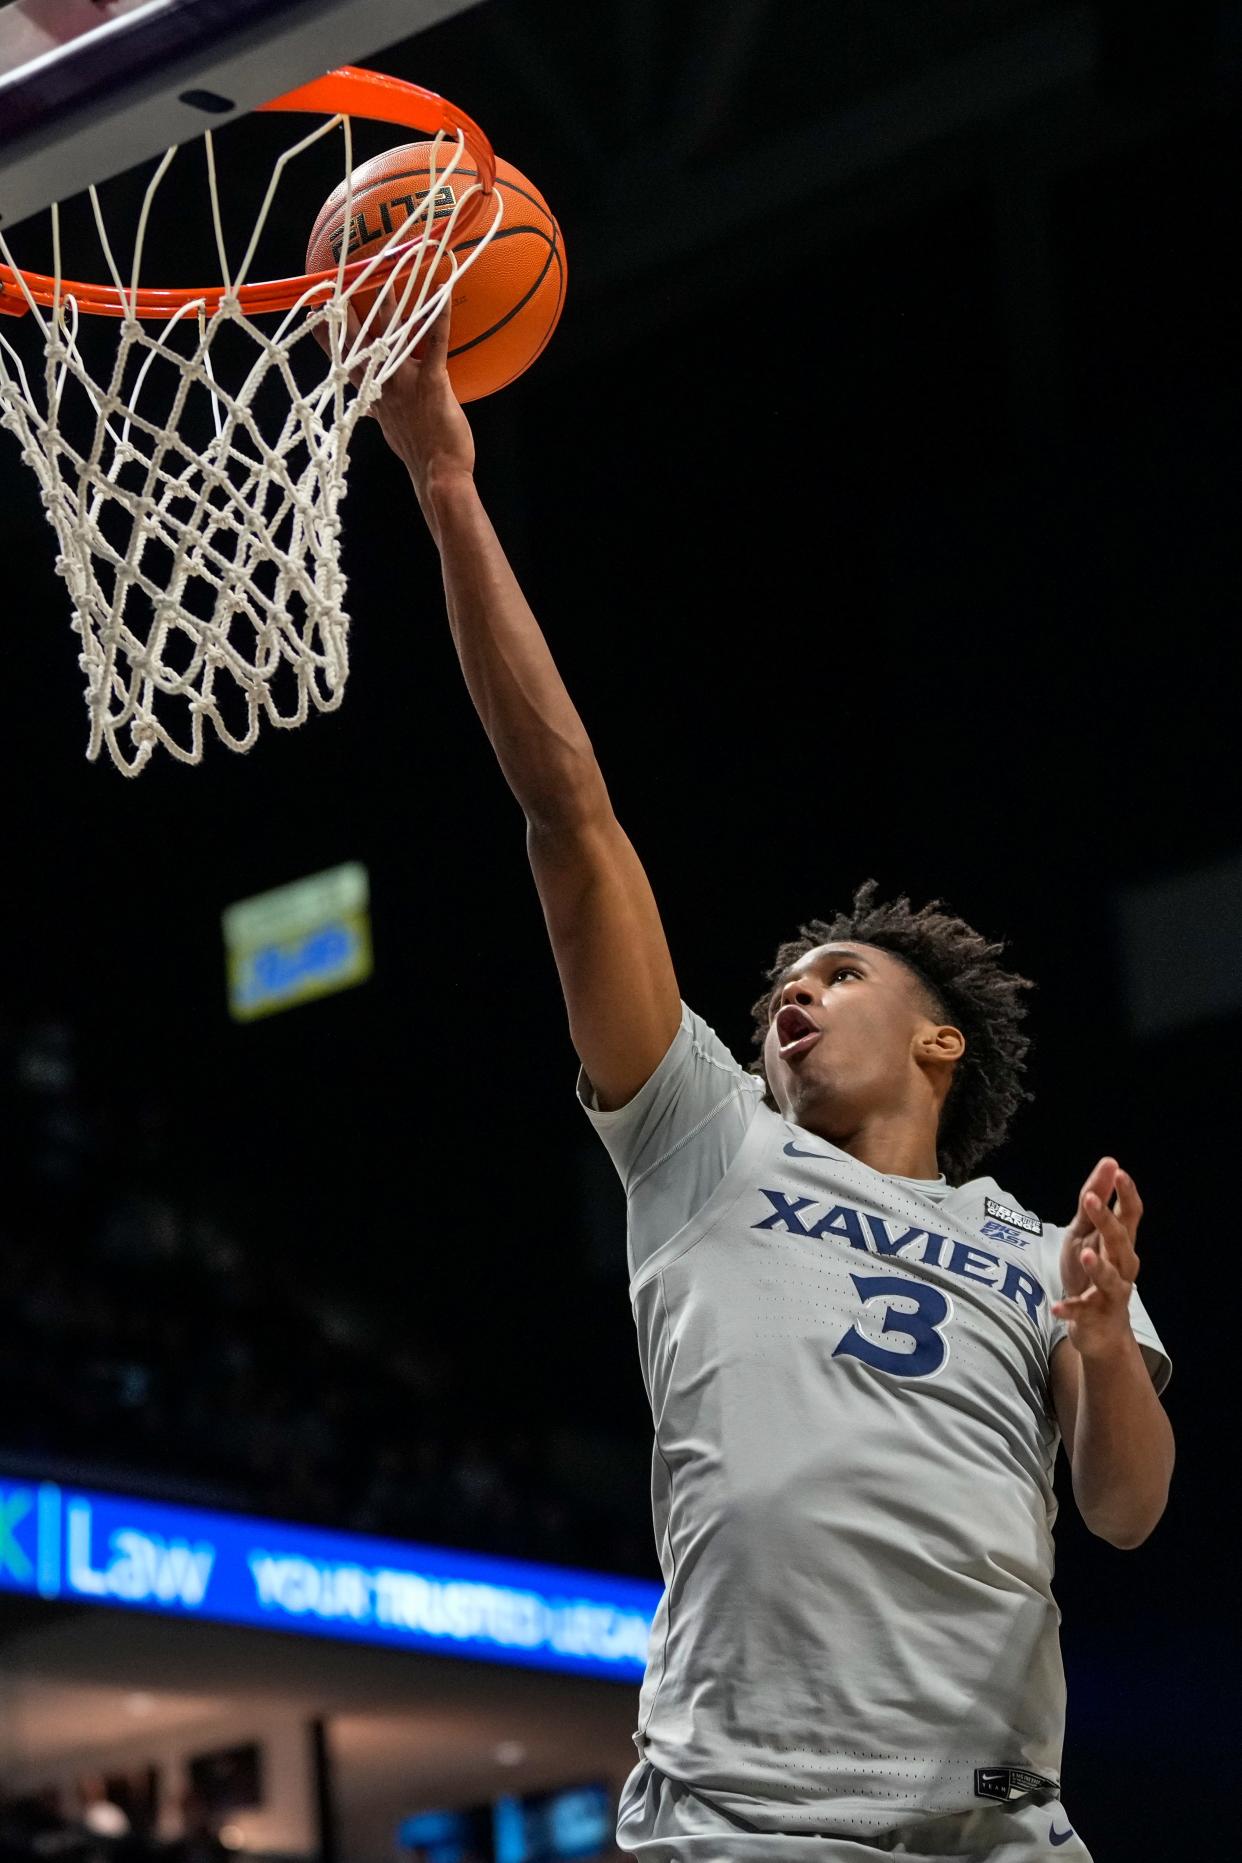 Xavier played shorthanded in Wednesday's loss to Butler after learning shortly  before tipoff that swingman Dailyn Swain would be out indefinitely after an appendectomy.